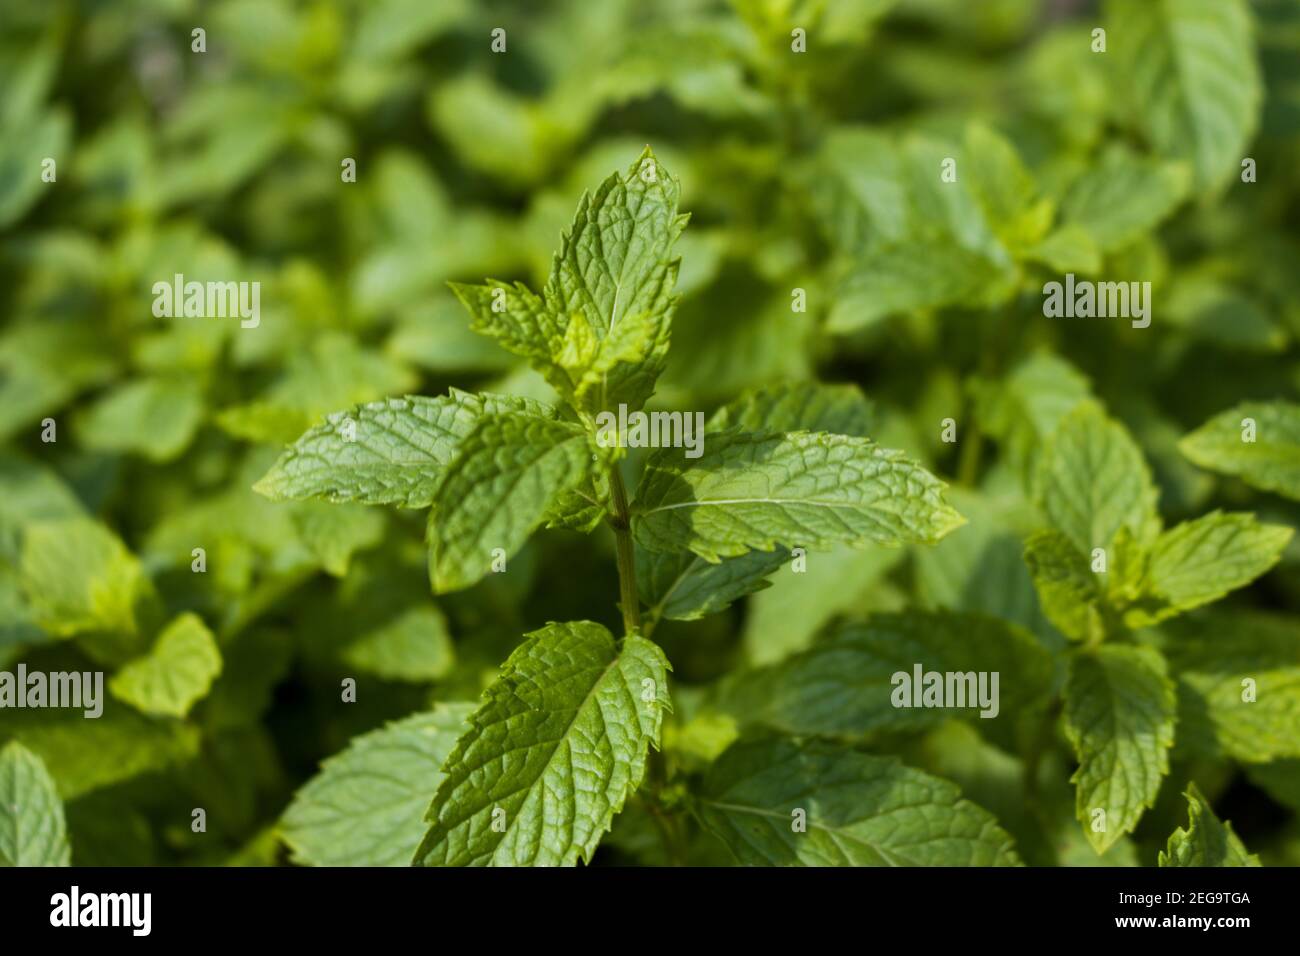 Close up shot of a mint stem with blurred background Stock Photo